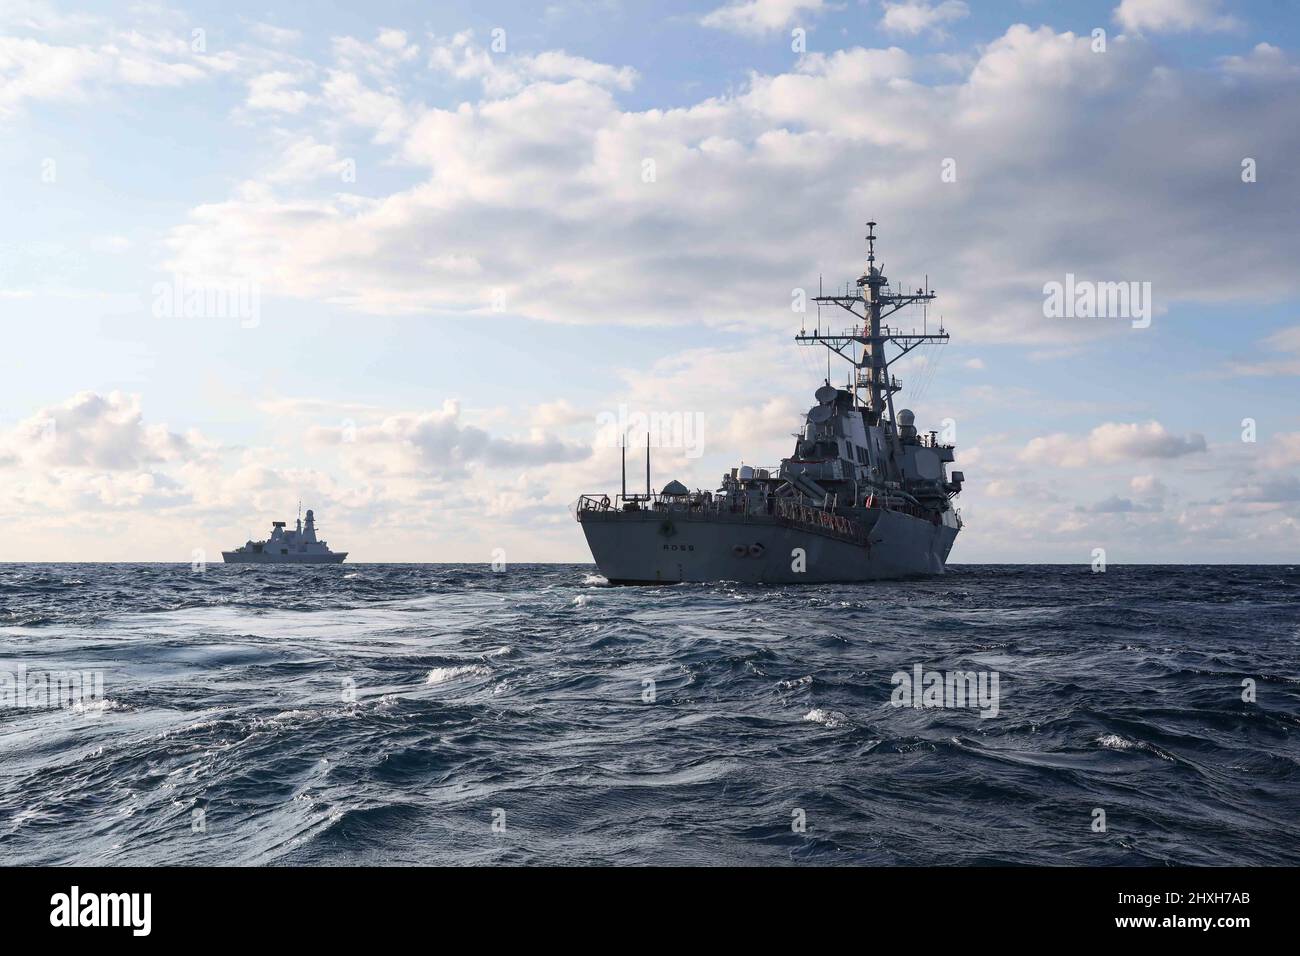 220307-N-UN585-2033 MEDITERRANEAN SEA (March 7, 2022) The French ship FS Forbin (D 620), left, and the Arleigh Burke-class guided-missile destroyer USS Ross (DDG 71), transit the Mediterranean Sea, March 7, 2022. Ross, forward-deployed to Rota, Spain, is on its 12th patrol in the U.S. Sixth Fleet area of operations in support of regional allies and partners and U.S. national security interests in Europe and Africa. (U.S. Navy photo by Mass Communication Specialist 2nd Class Claire DuBois/Released) Stock Photo